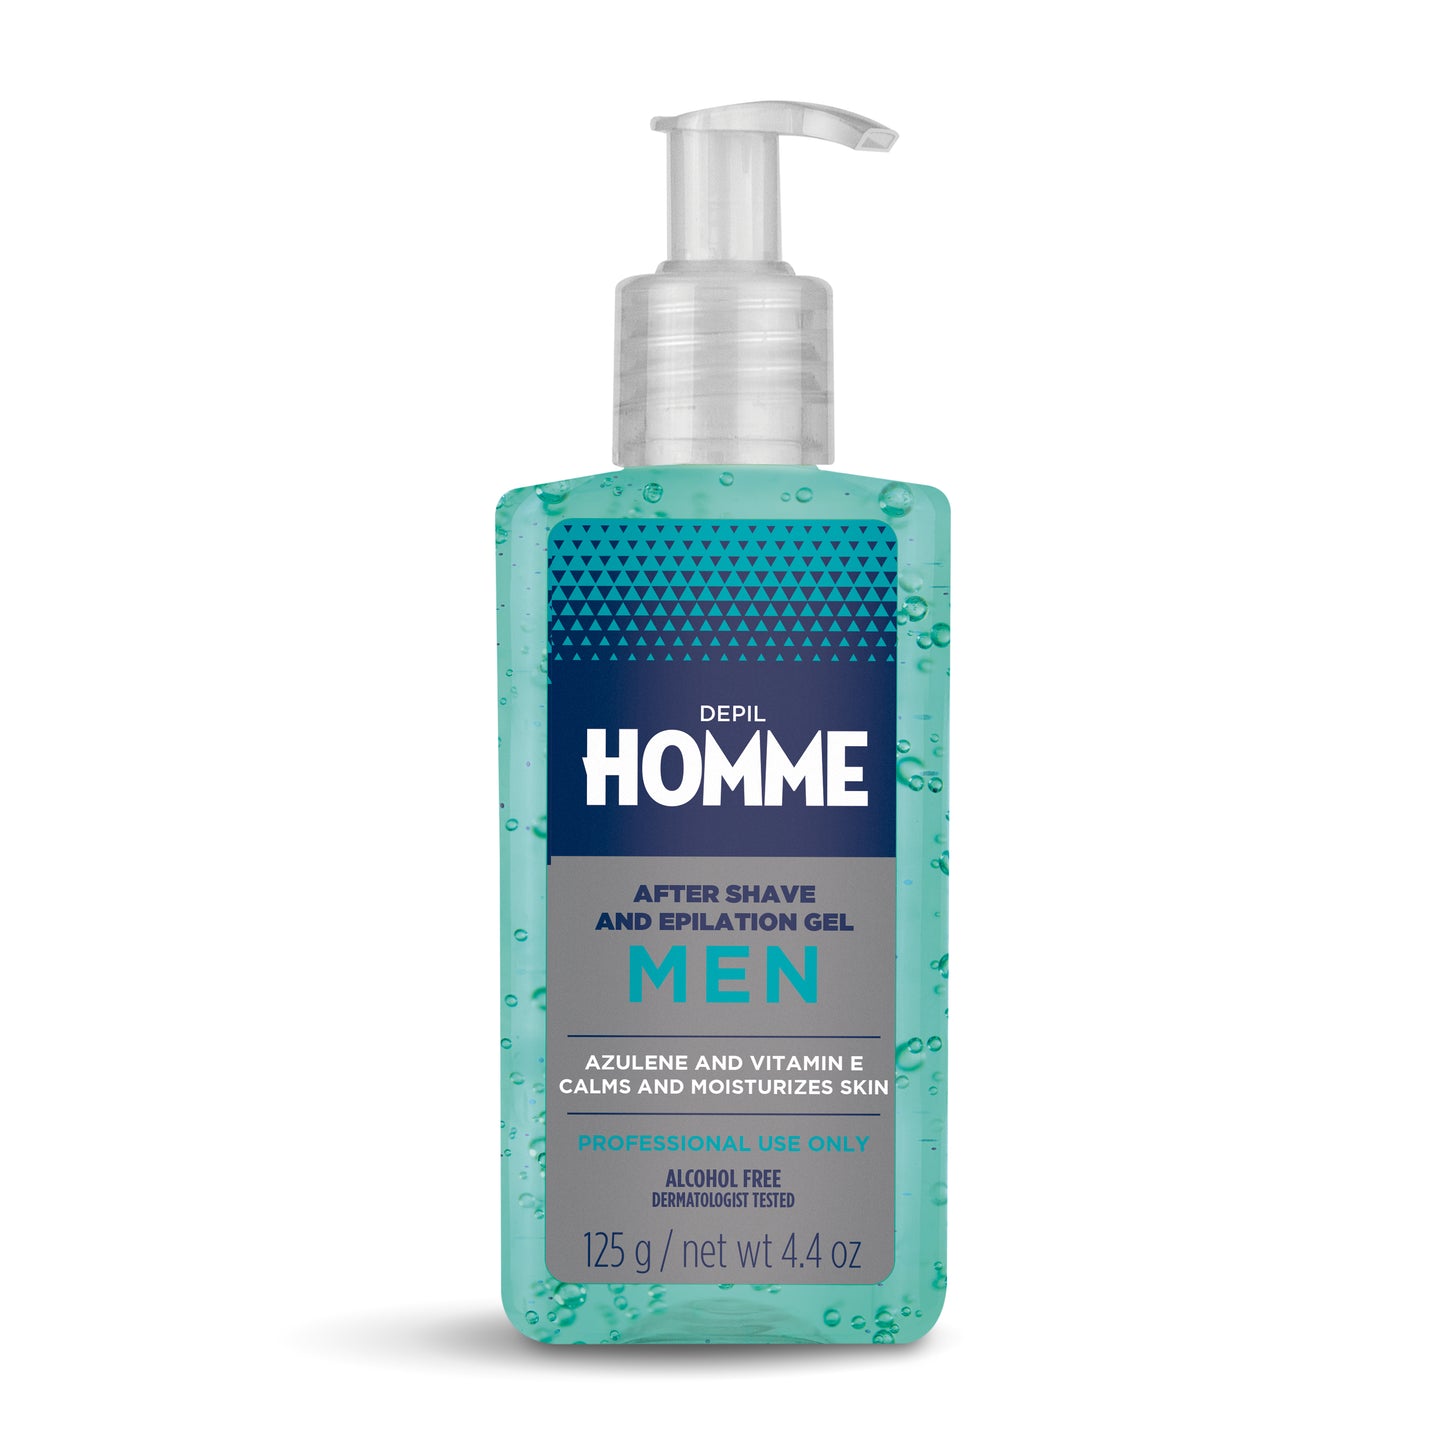 Depil Homme by Depil Bella After Shave and Waxing Gel 125g (6 Units Offer) - Depilcompany